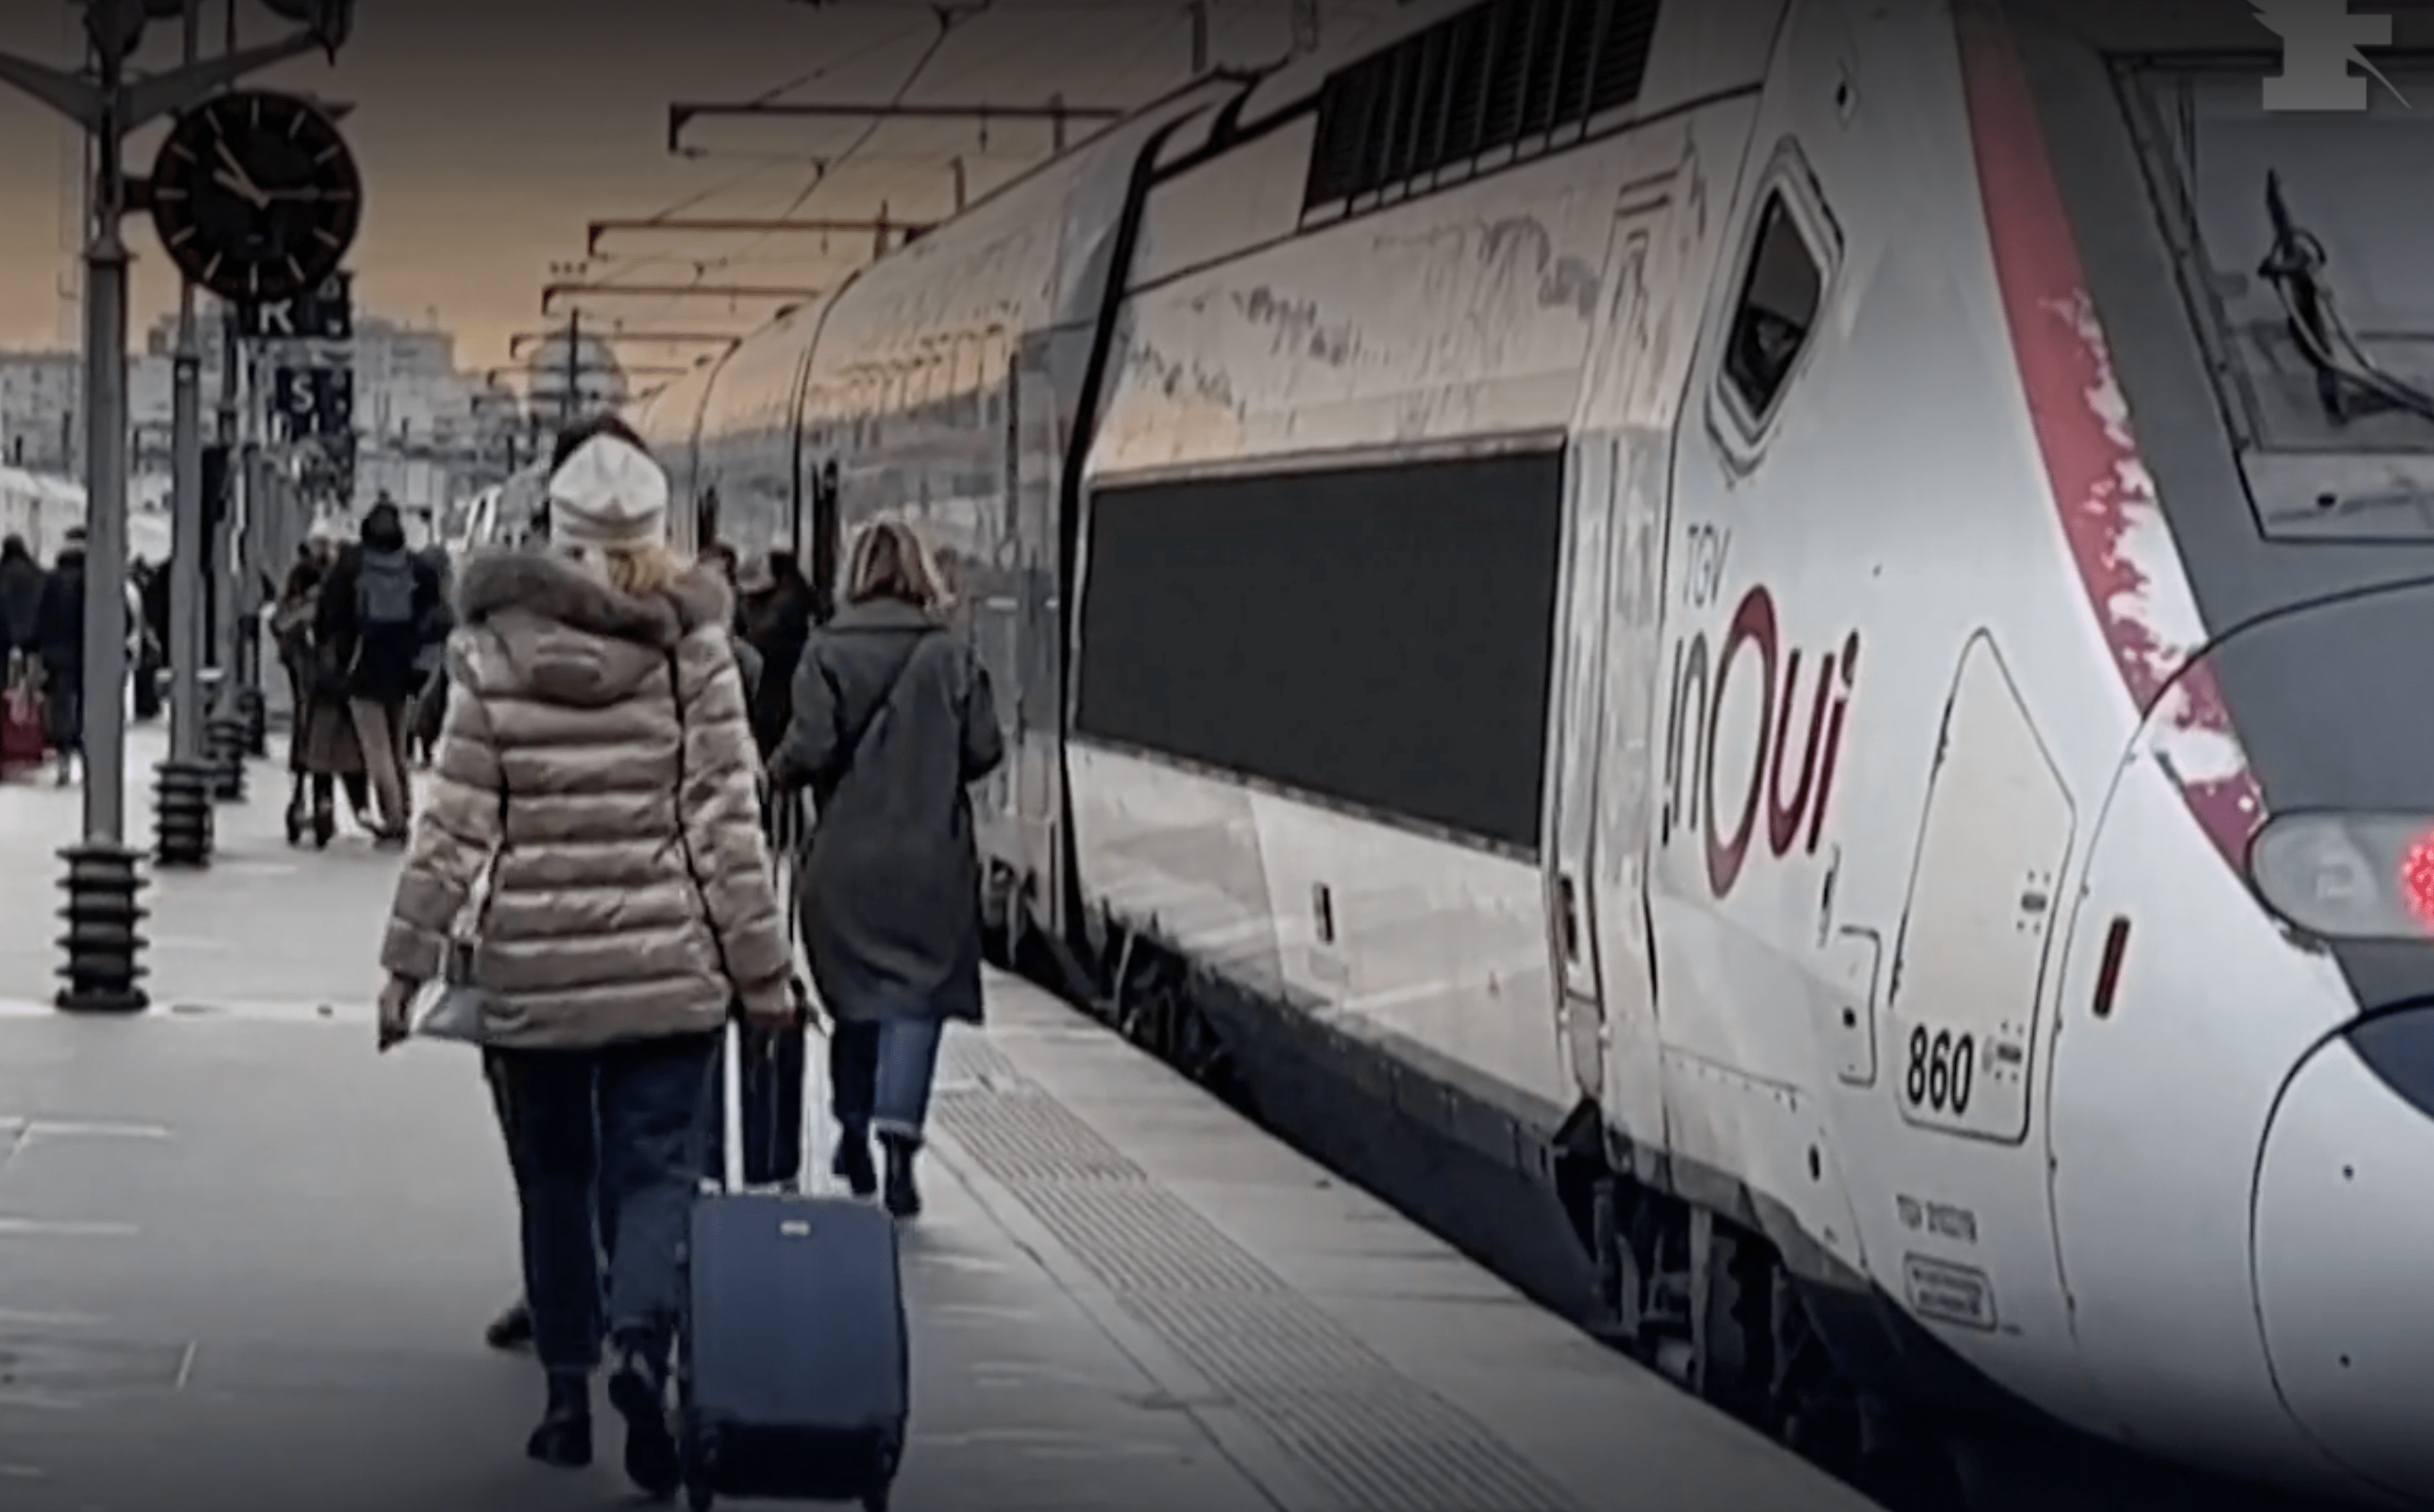 Belgian railway unions stand firm with 48-hour strike